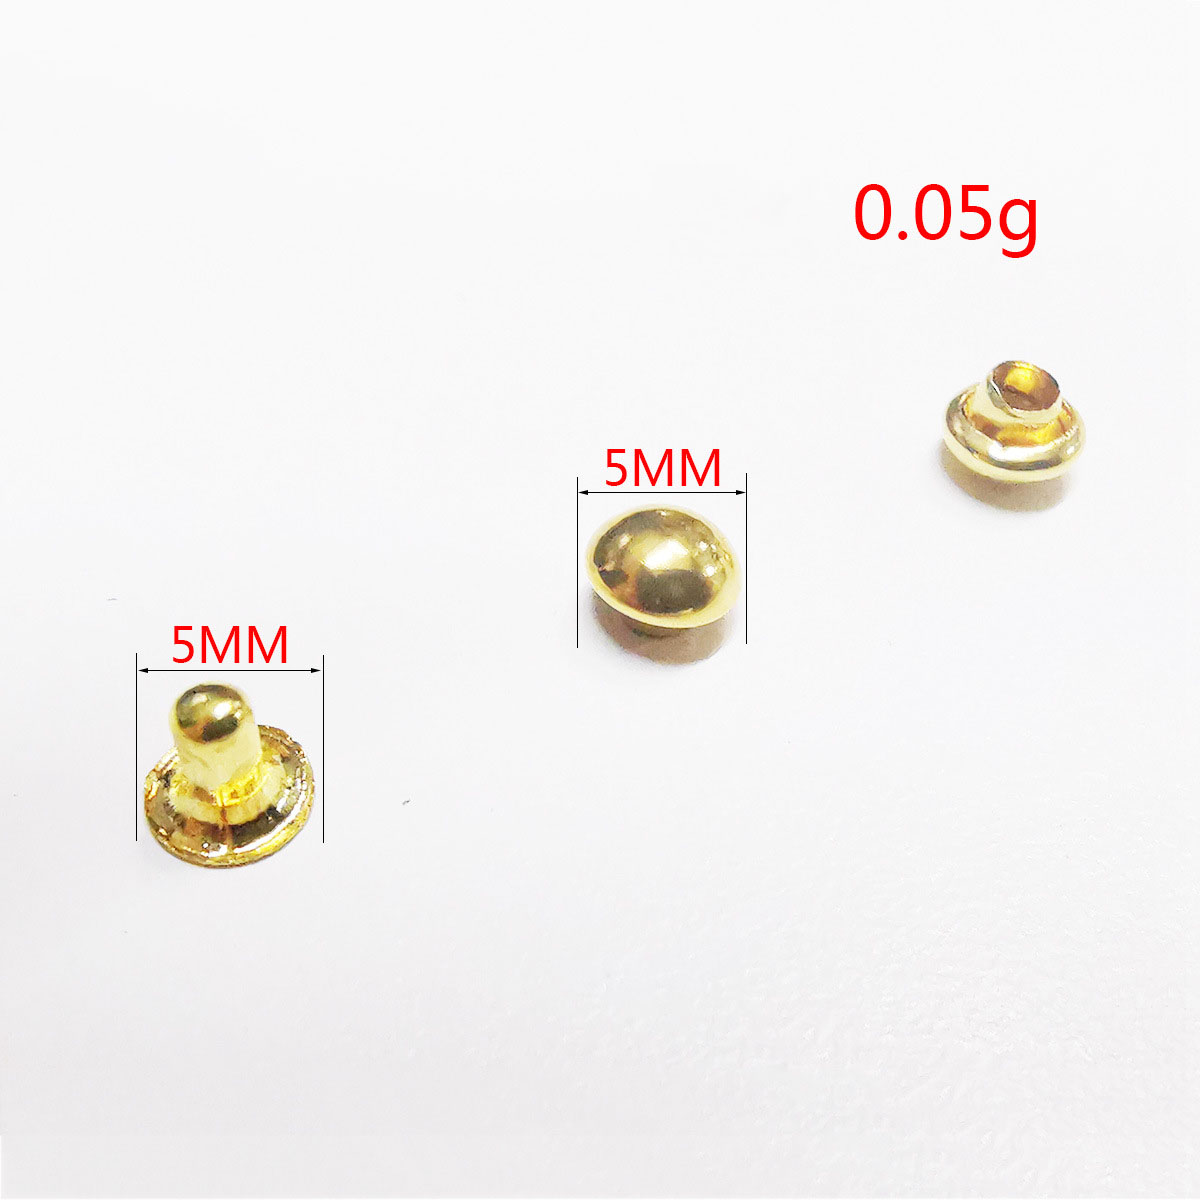 6:5mm gold